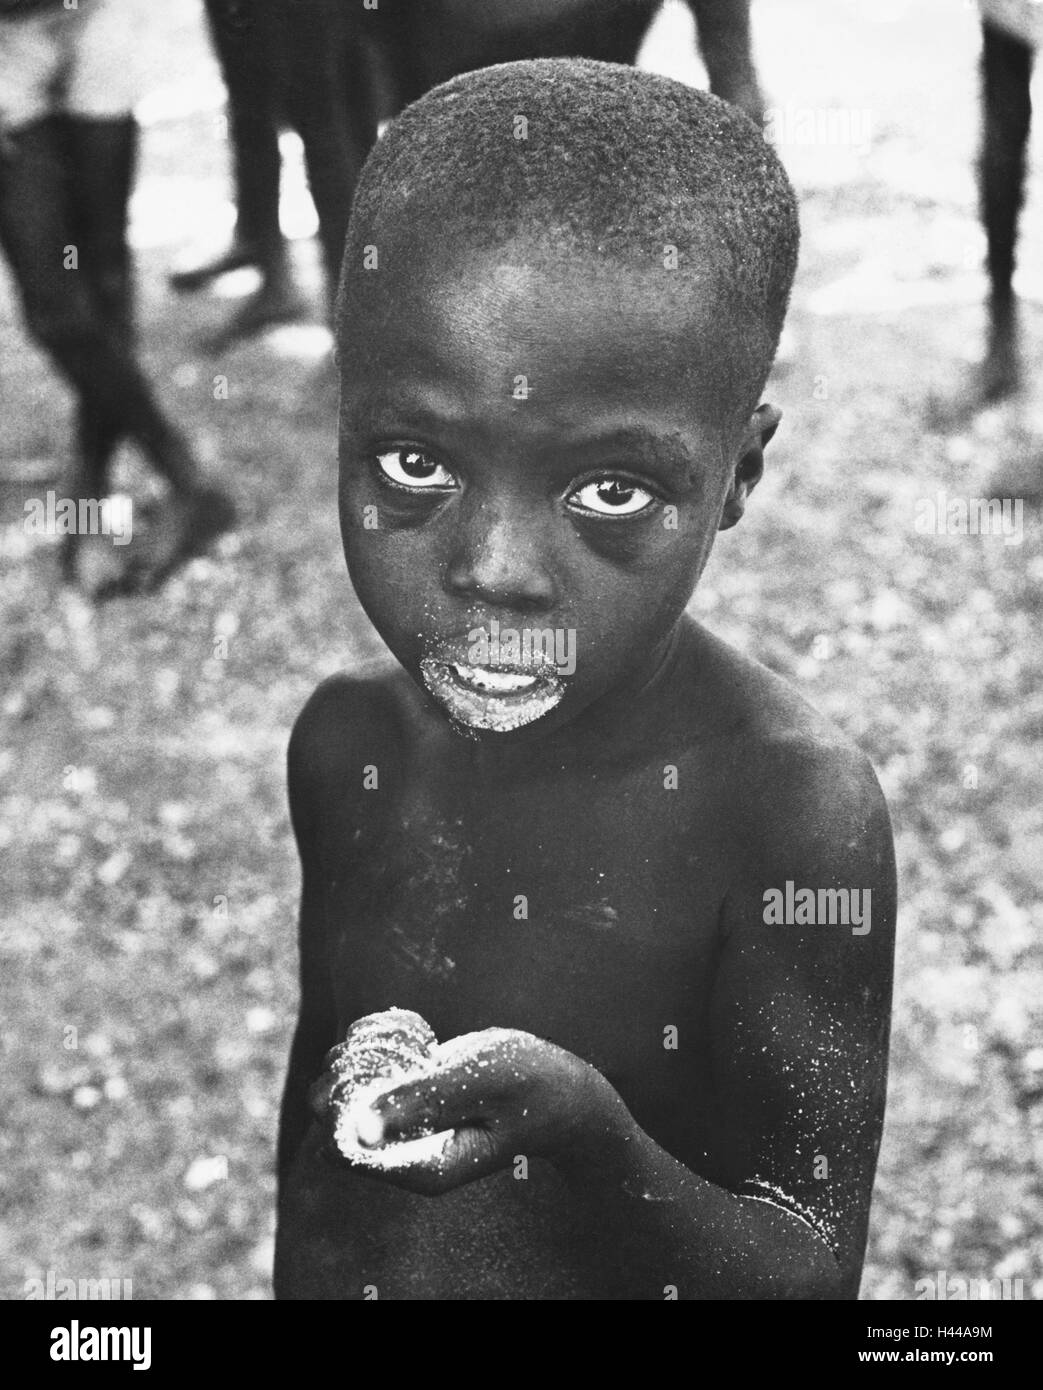 Dahomey, 1962, Child, flour, food, portrait, West Africa, Africa, Benin, people, dark-skinned, African, Coloured, Africans, misery, poverty, hunger, starvation, lack of food, malnourished, victims, helplessness, famine, despair, outside, Stock Photo